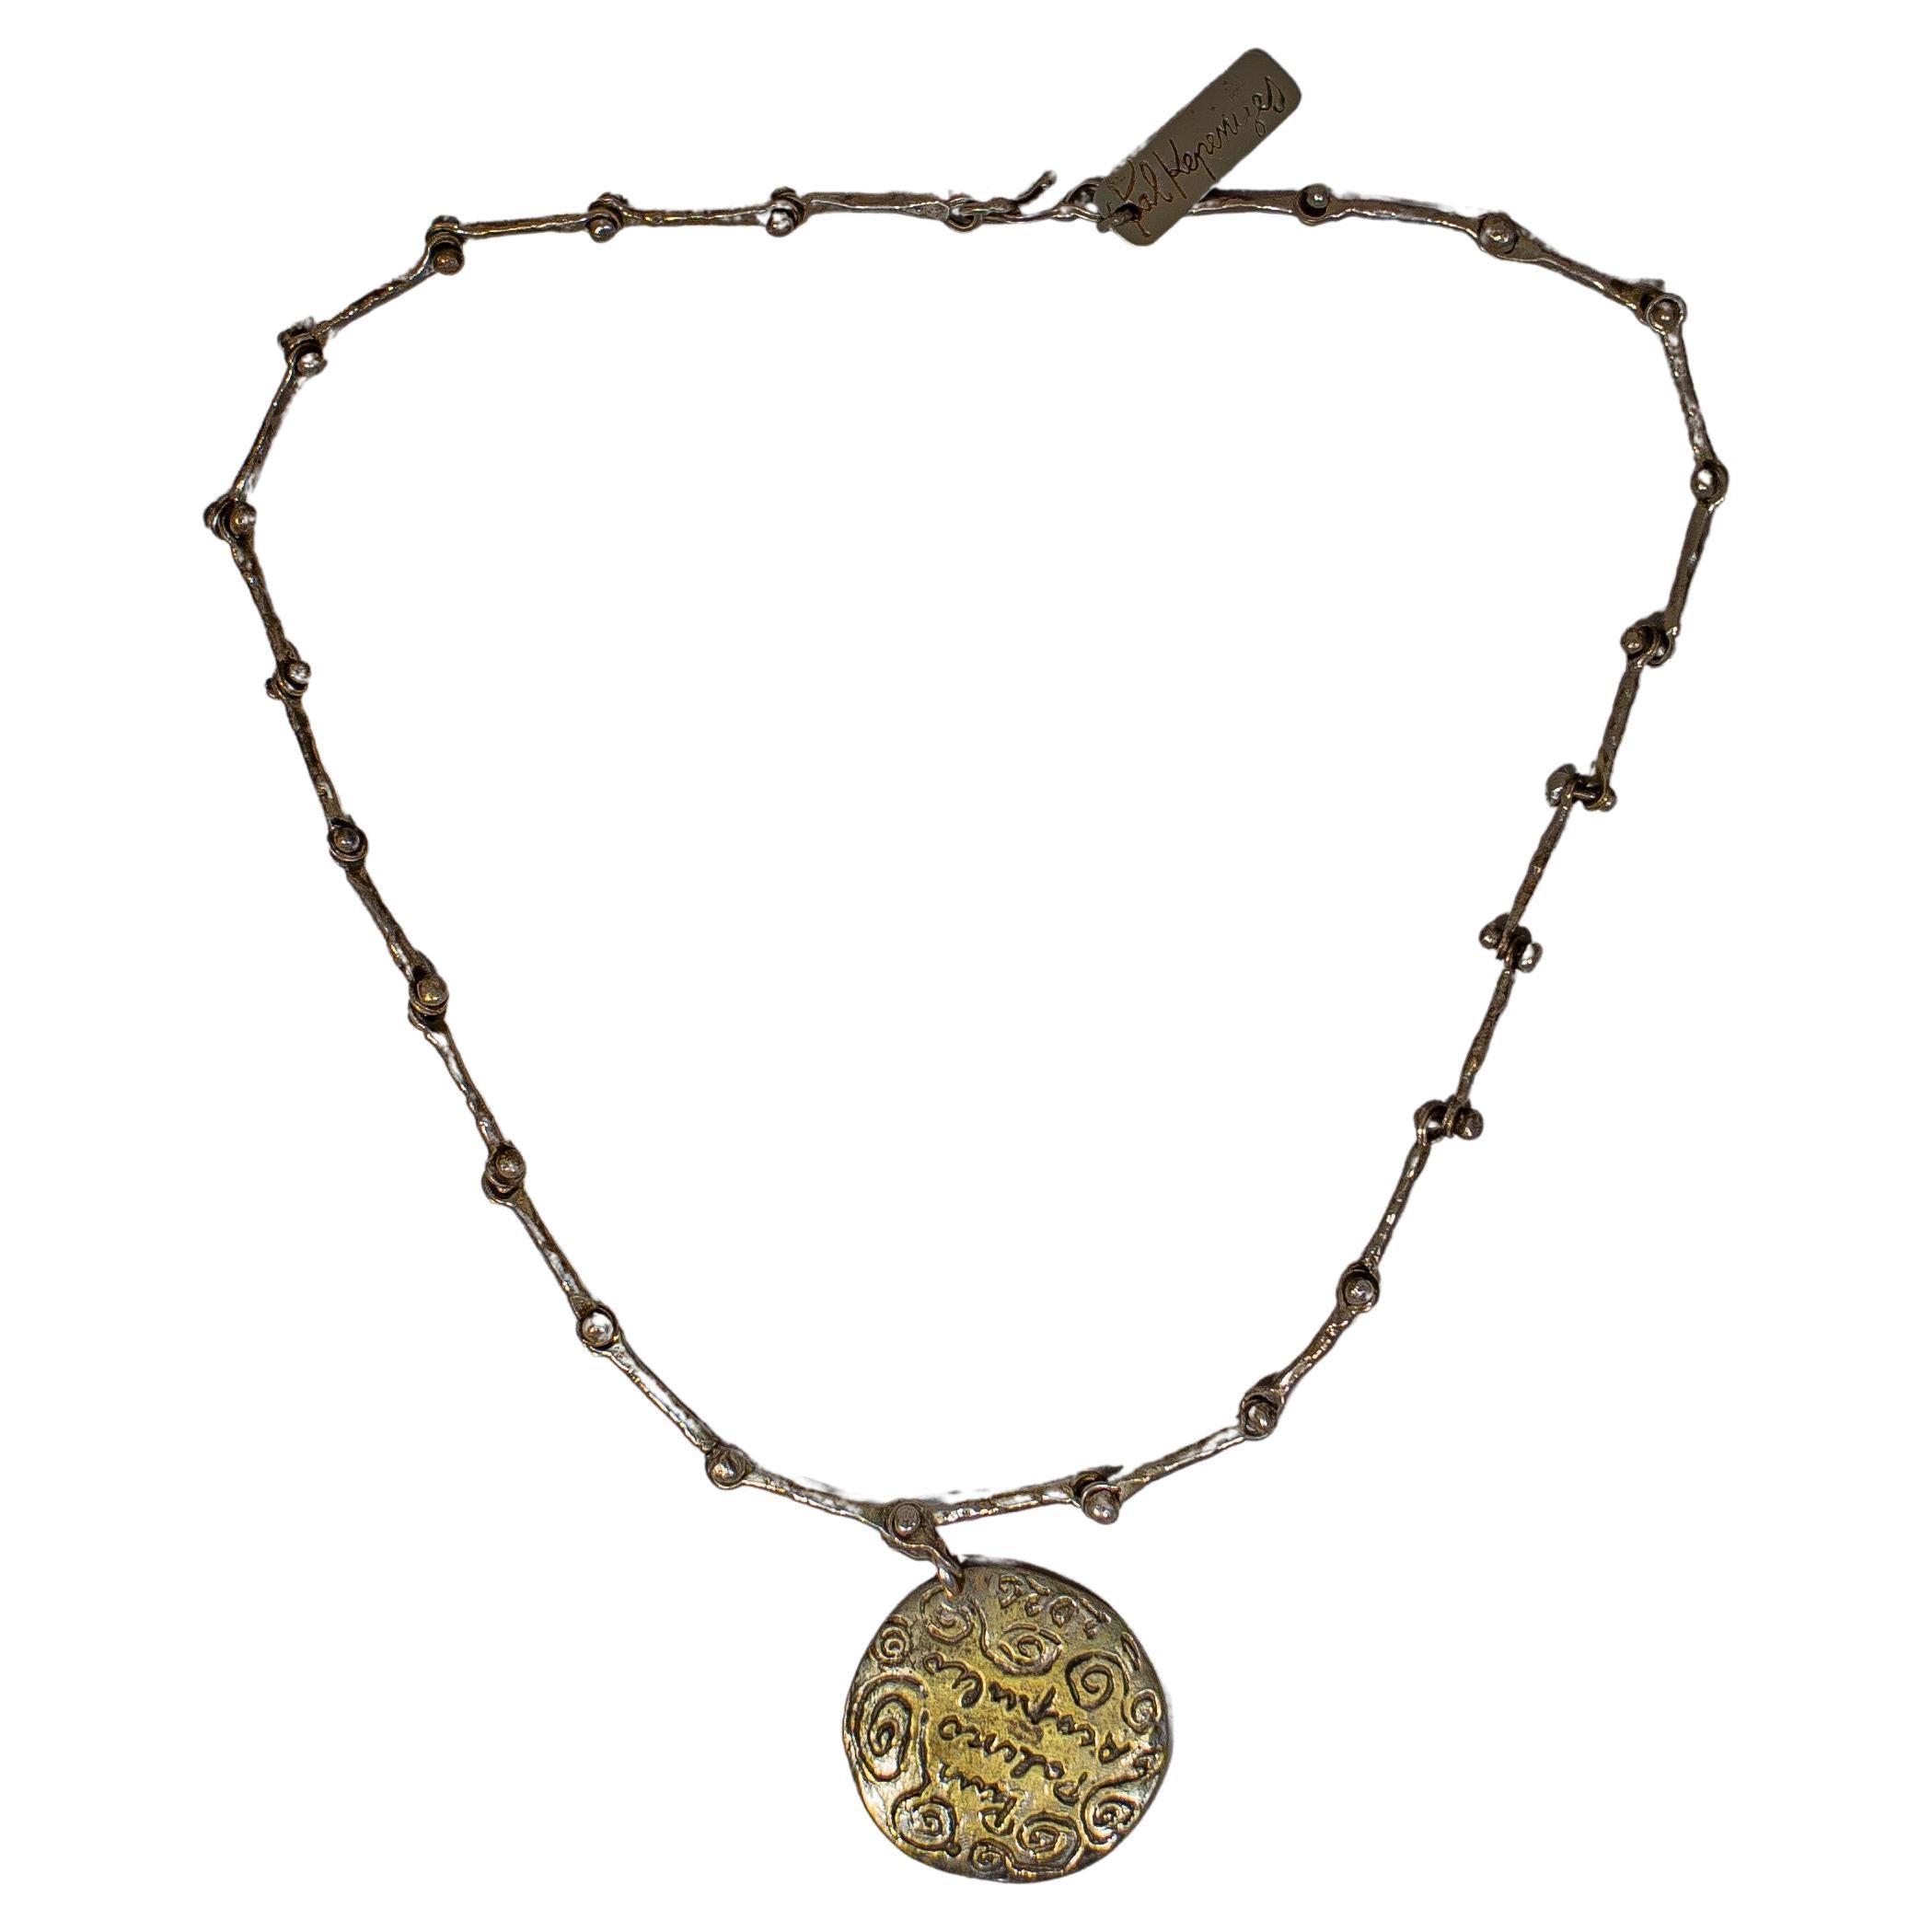 Pal Kepenyes Brutalist Silver and Bronze Necklace